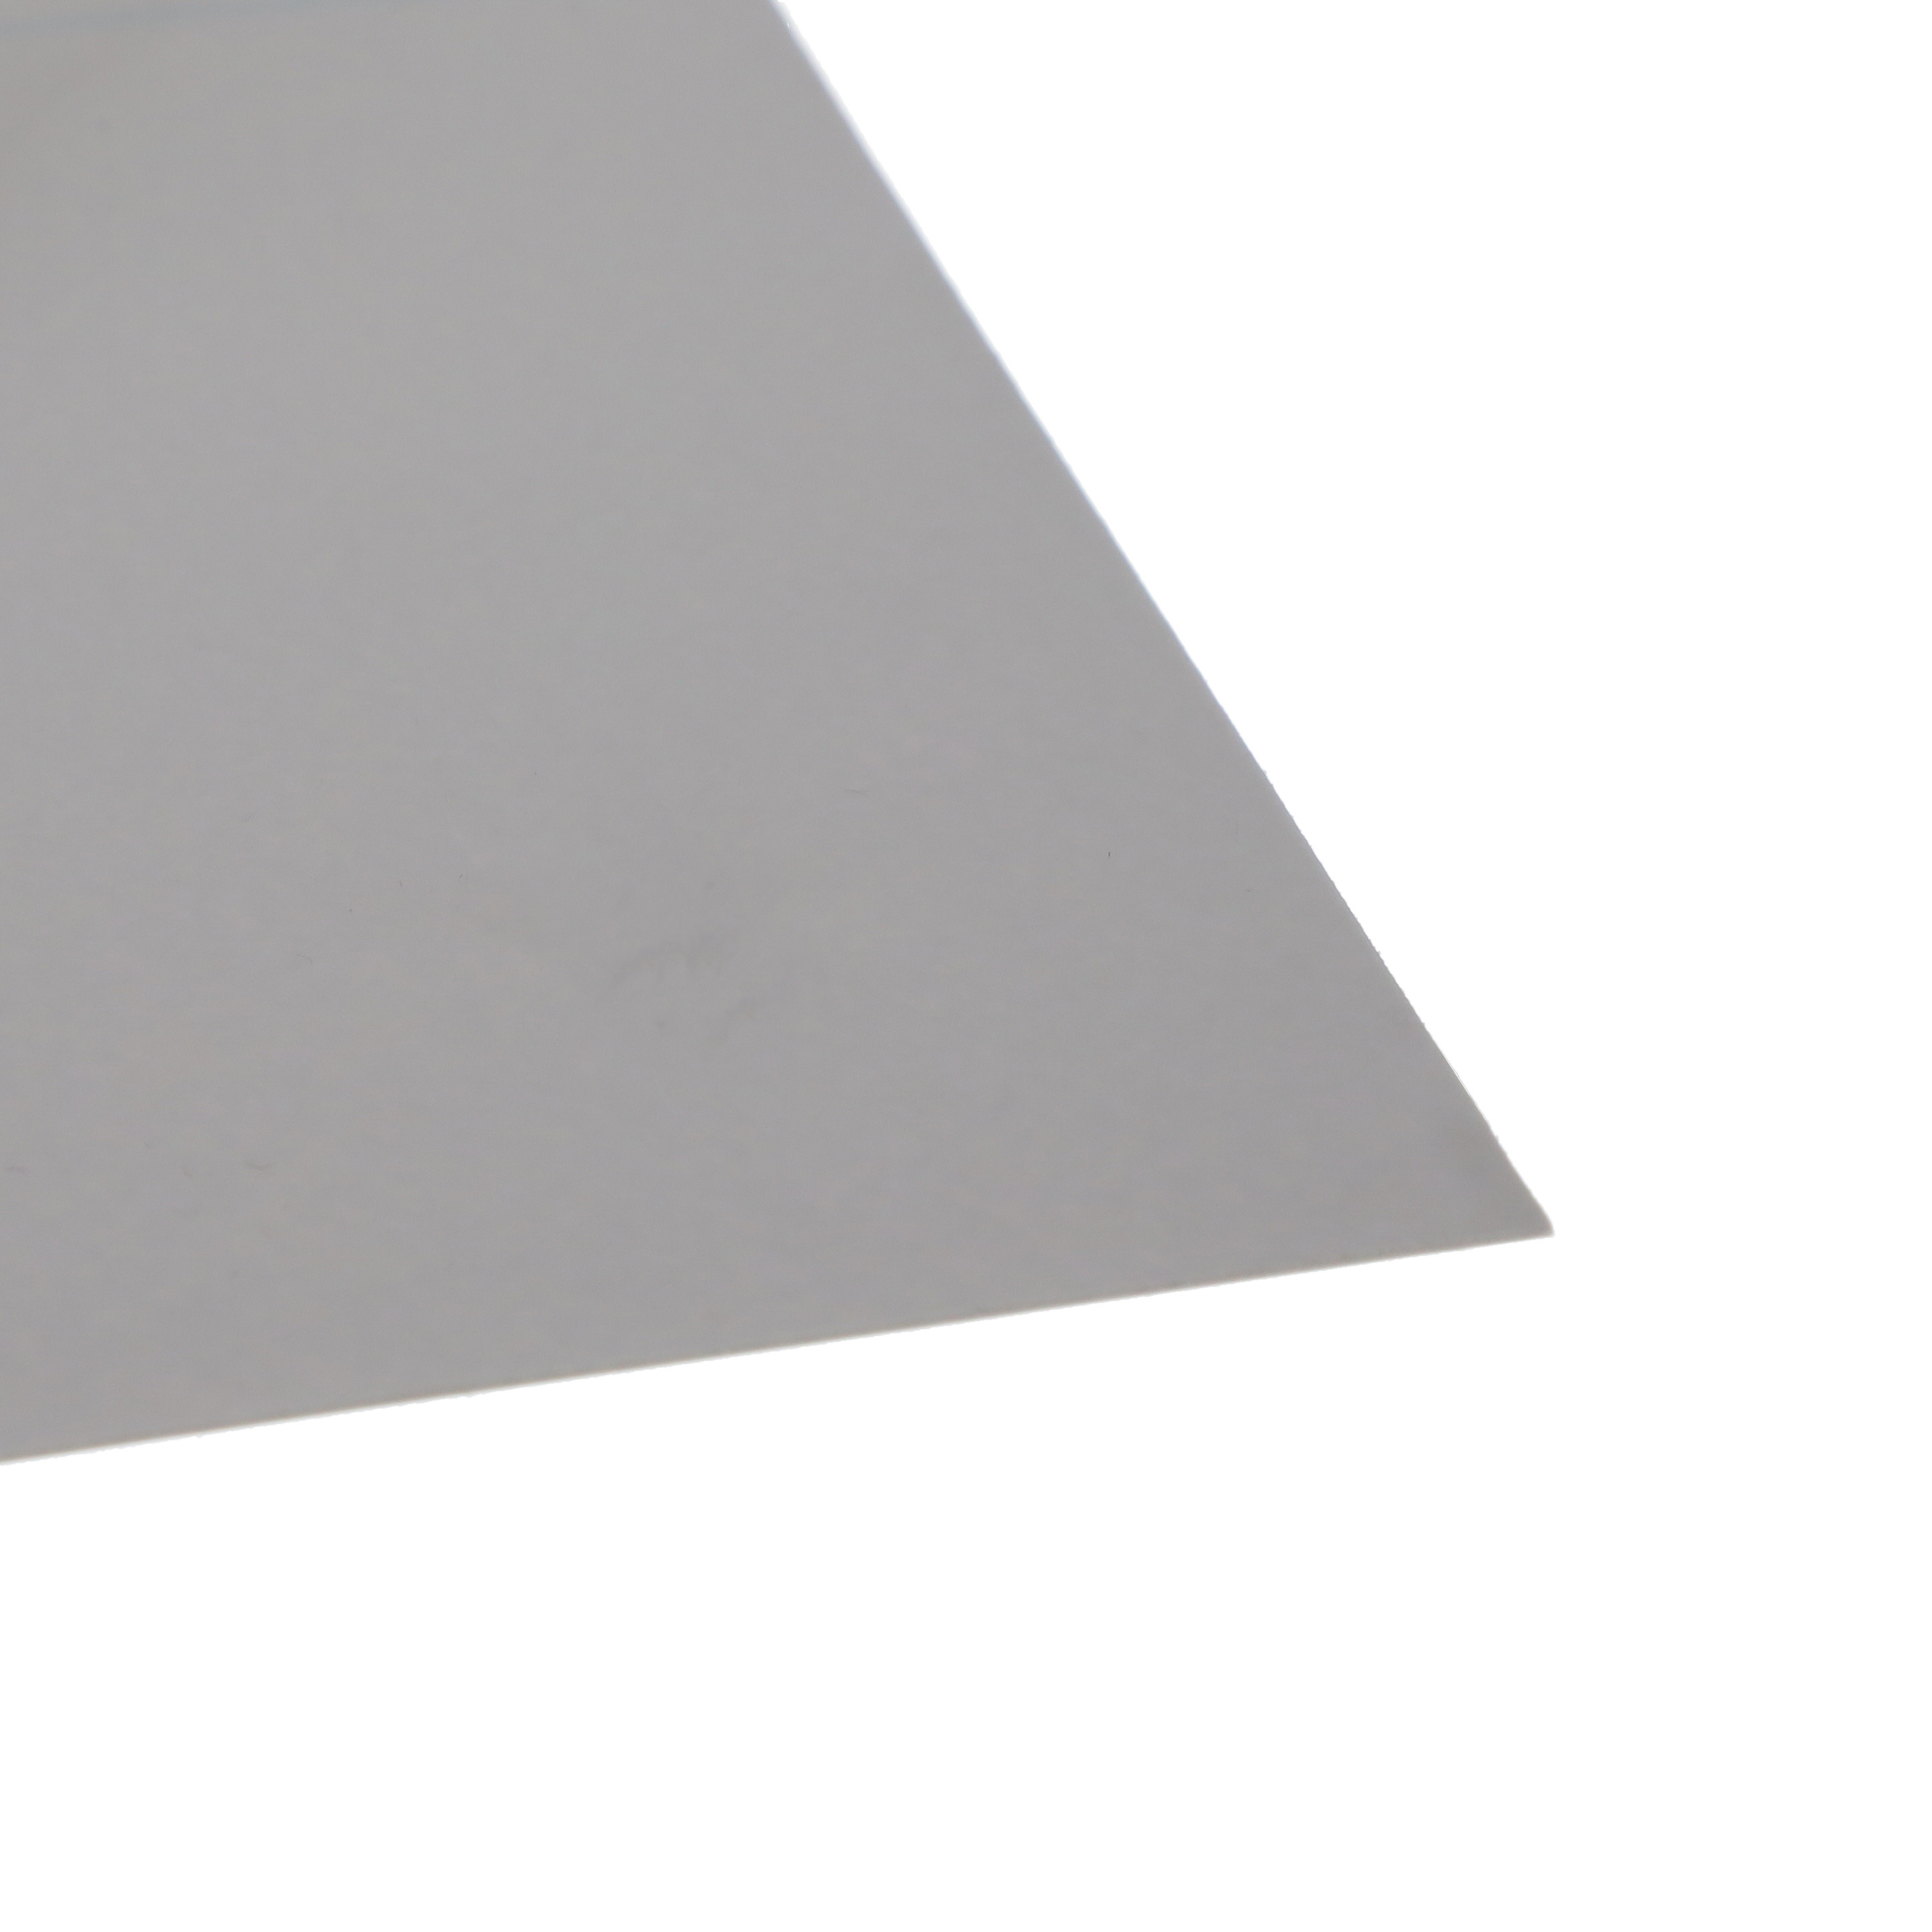 【COH-1706-410-10-1NT】THERM PAD 410X410MM GRAY